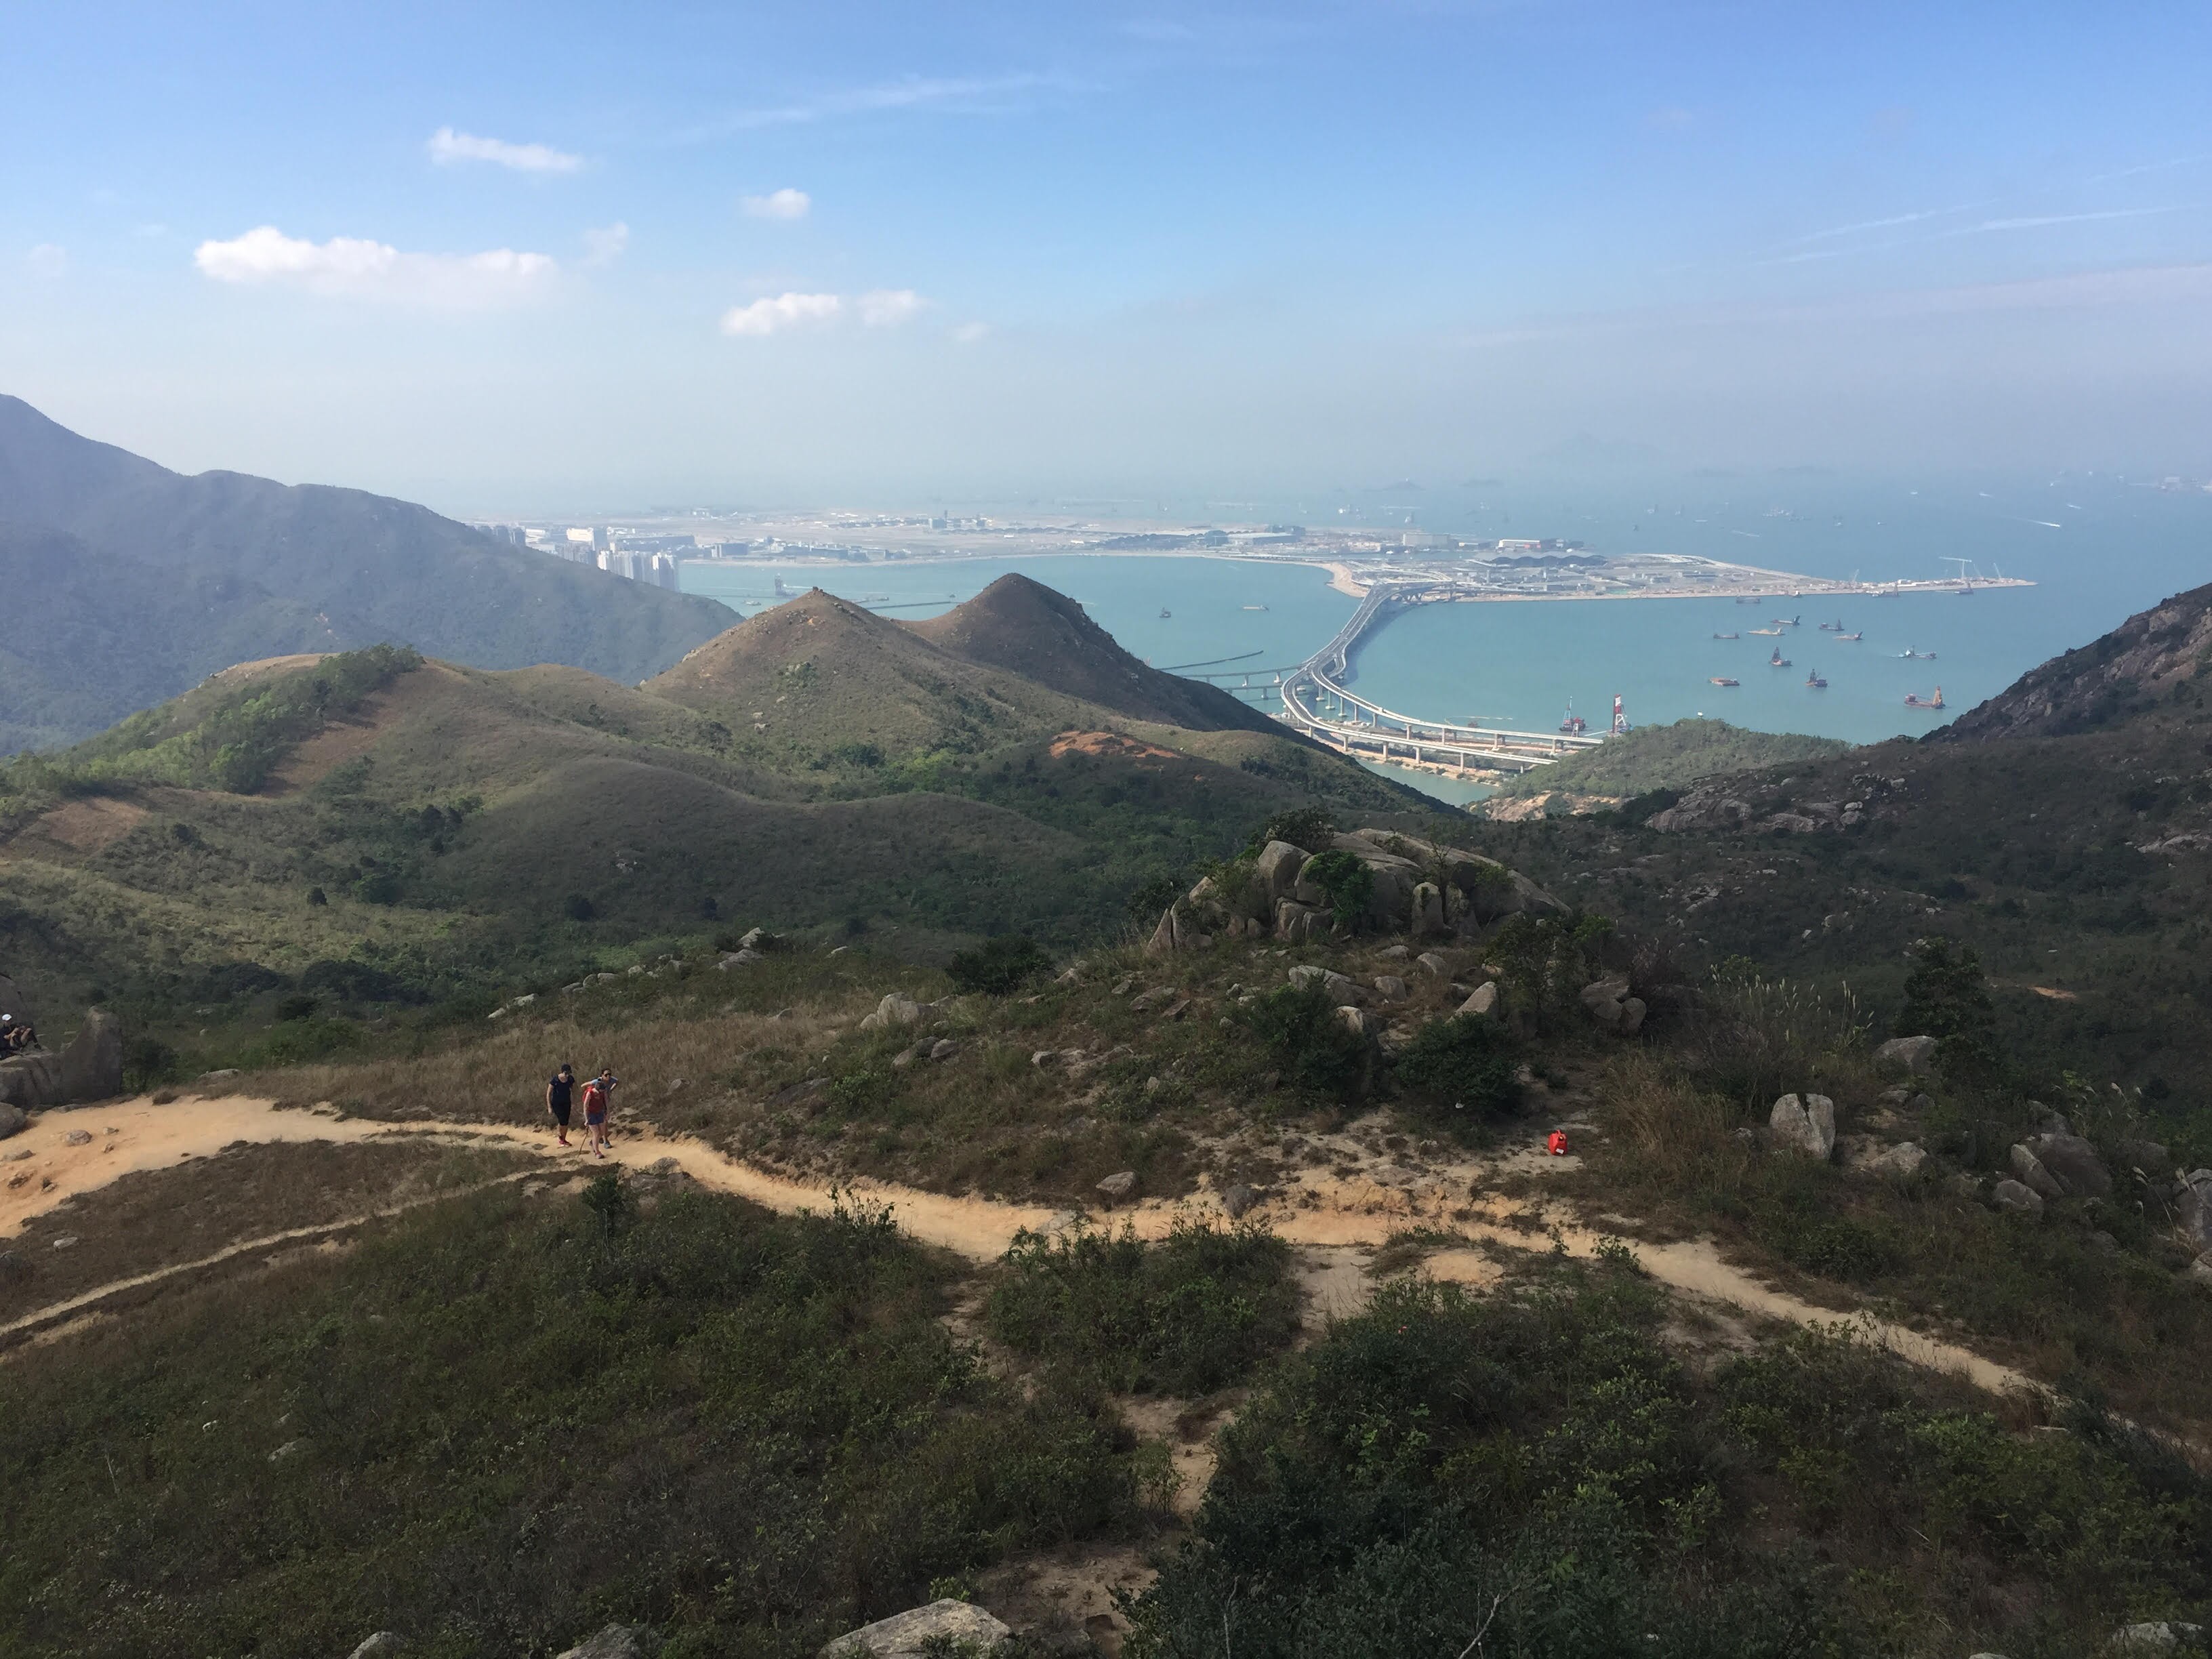 Hong Kong airport as seen from the Tiger’s Head trail on Lantau Island. The 2030 Plus results were published in 2016, but its key findings have been now been declared inadequate. Photo: Huy Truong